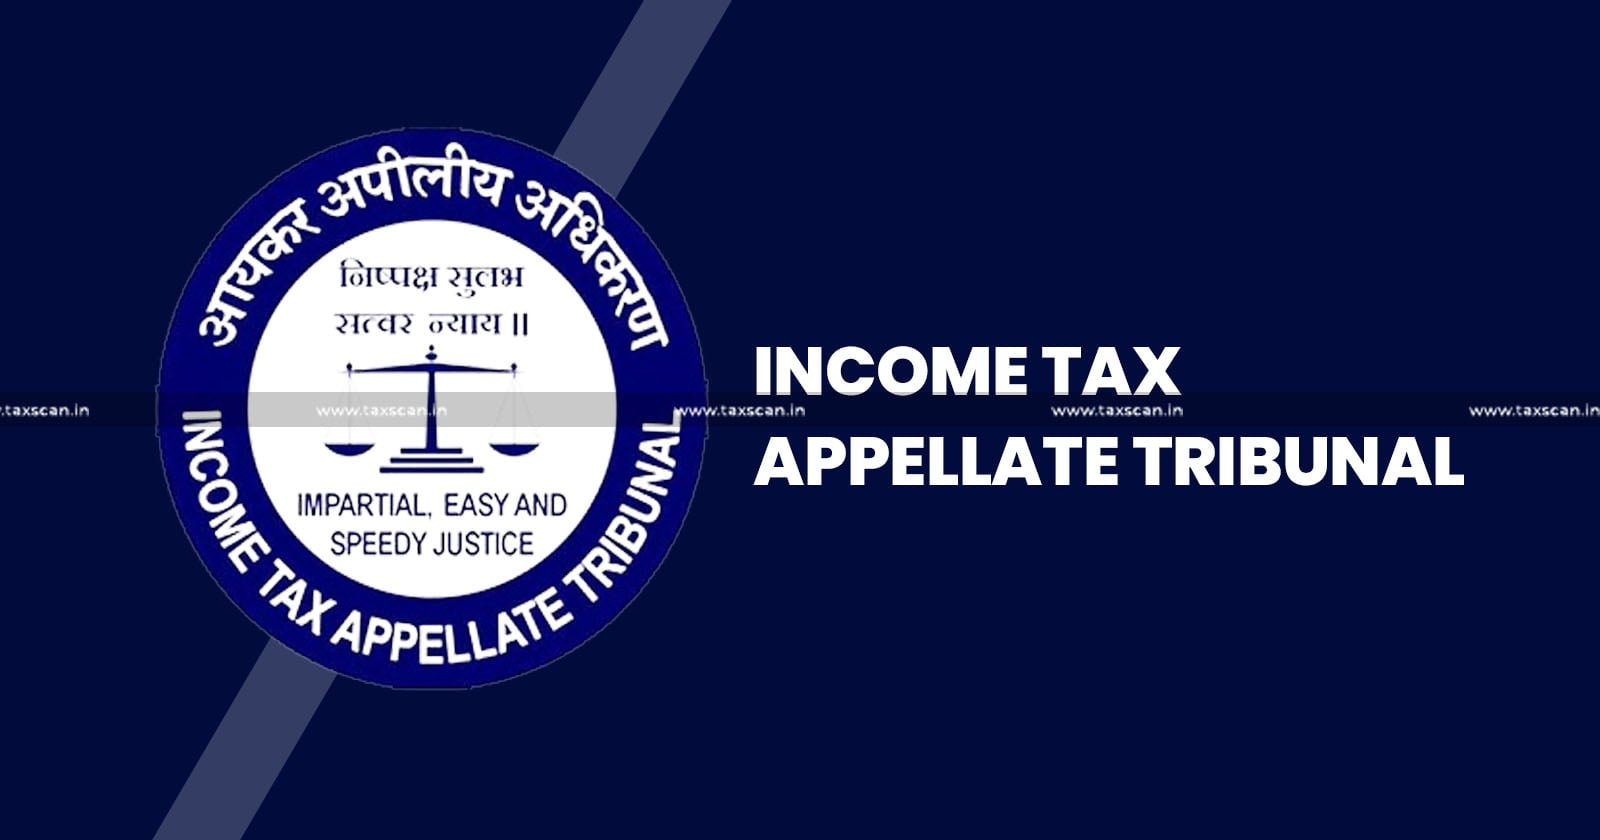 ITAT - ITAT new appointments - Income Tax - Central Government ITAT postings - ITAT postings - taxscan